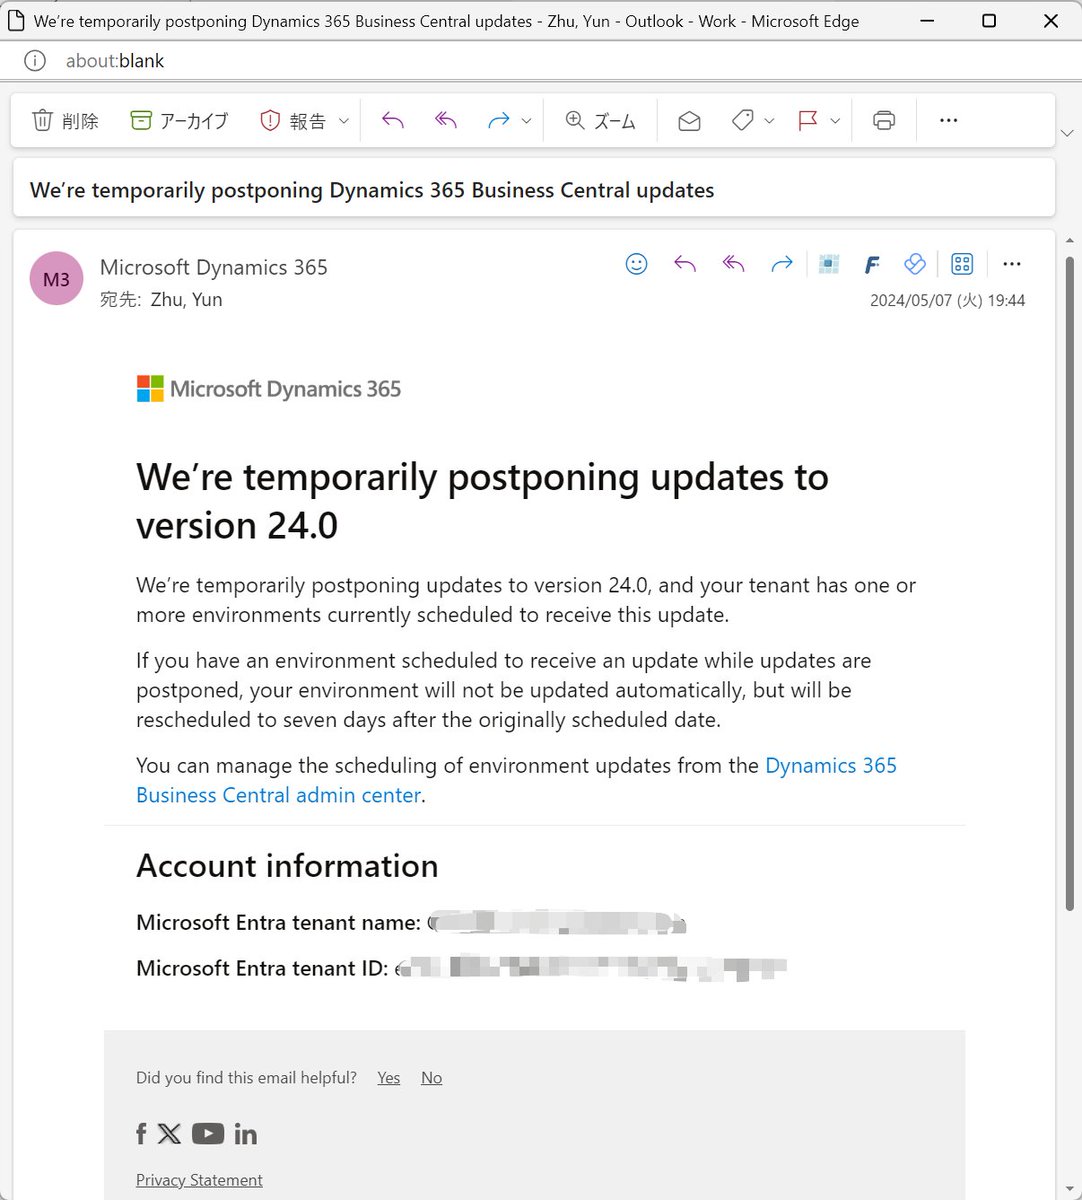 Again???🧐
BC v24.0 major update of the existing environment temporarily postponed!!!

PS: Dynamics 365 Business Central postponed updates history yzhums.com/37293/ 

#Dynamics365 
#Dynamics
#MSDyn365
#MicrosoftDYN365 
#MSDyn365BC
#businesscentral